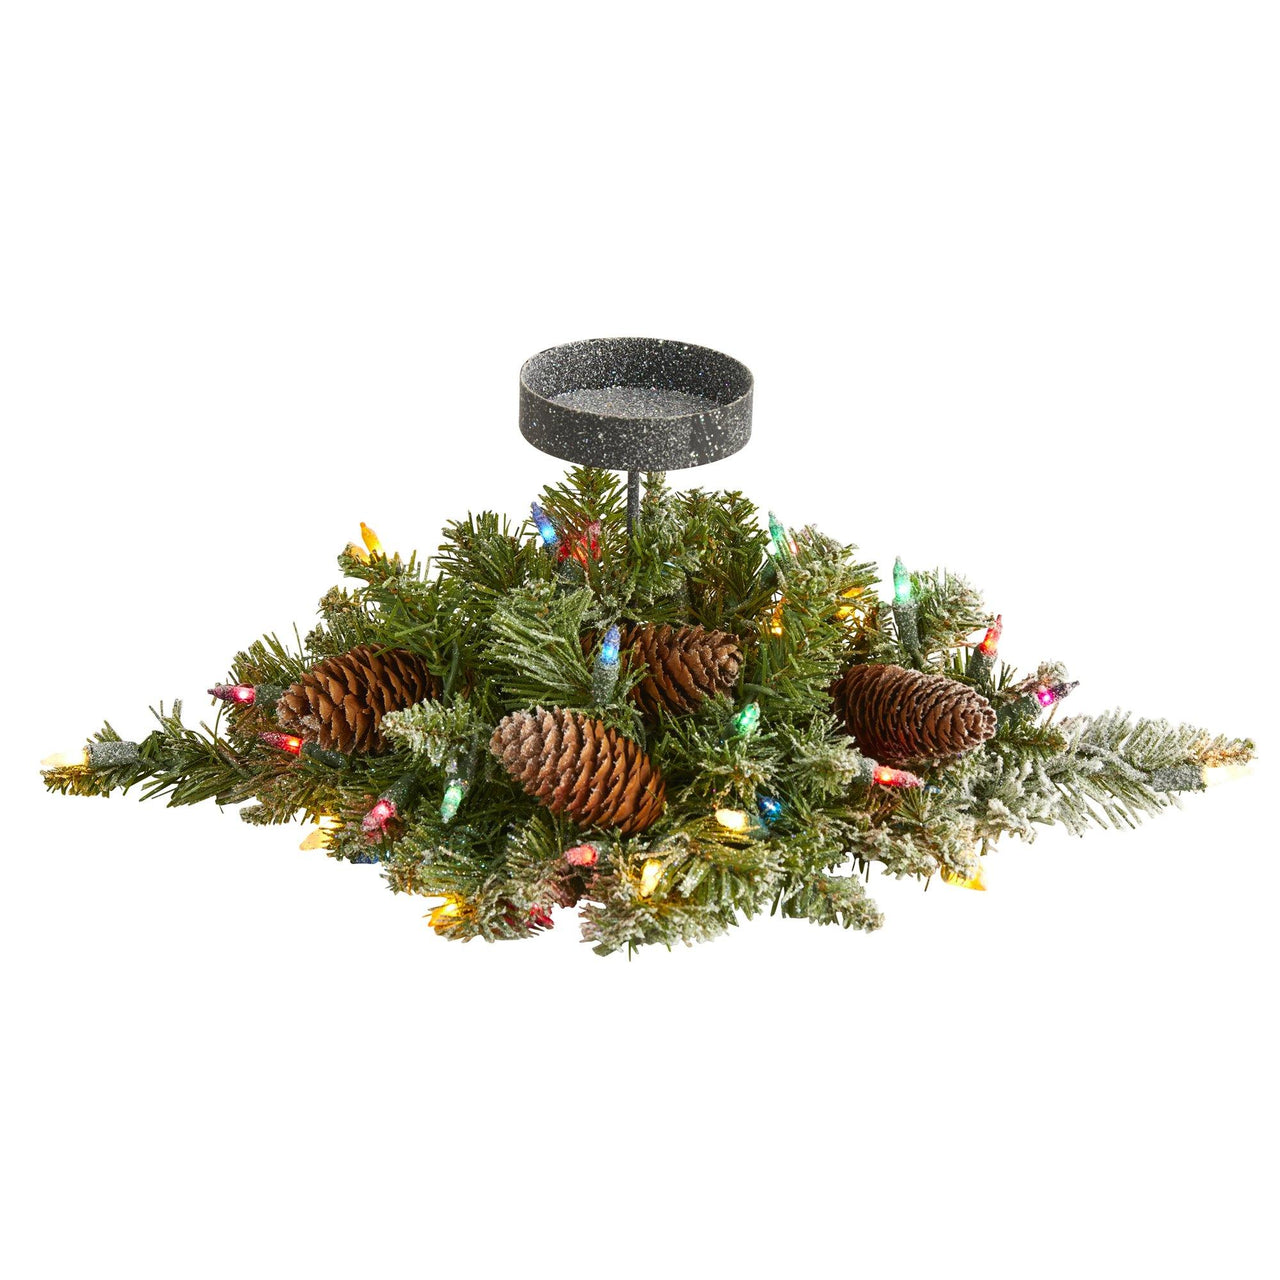 16” Flocked Artificial Christmas Pine Candelabrum with 35 Multicolored Lights and Pine Cones